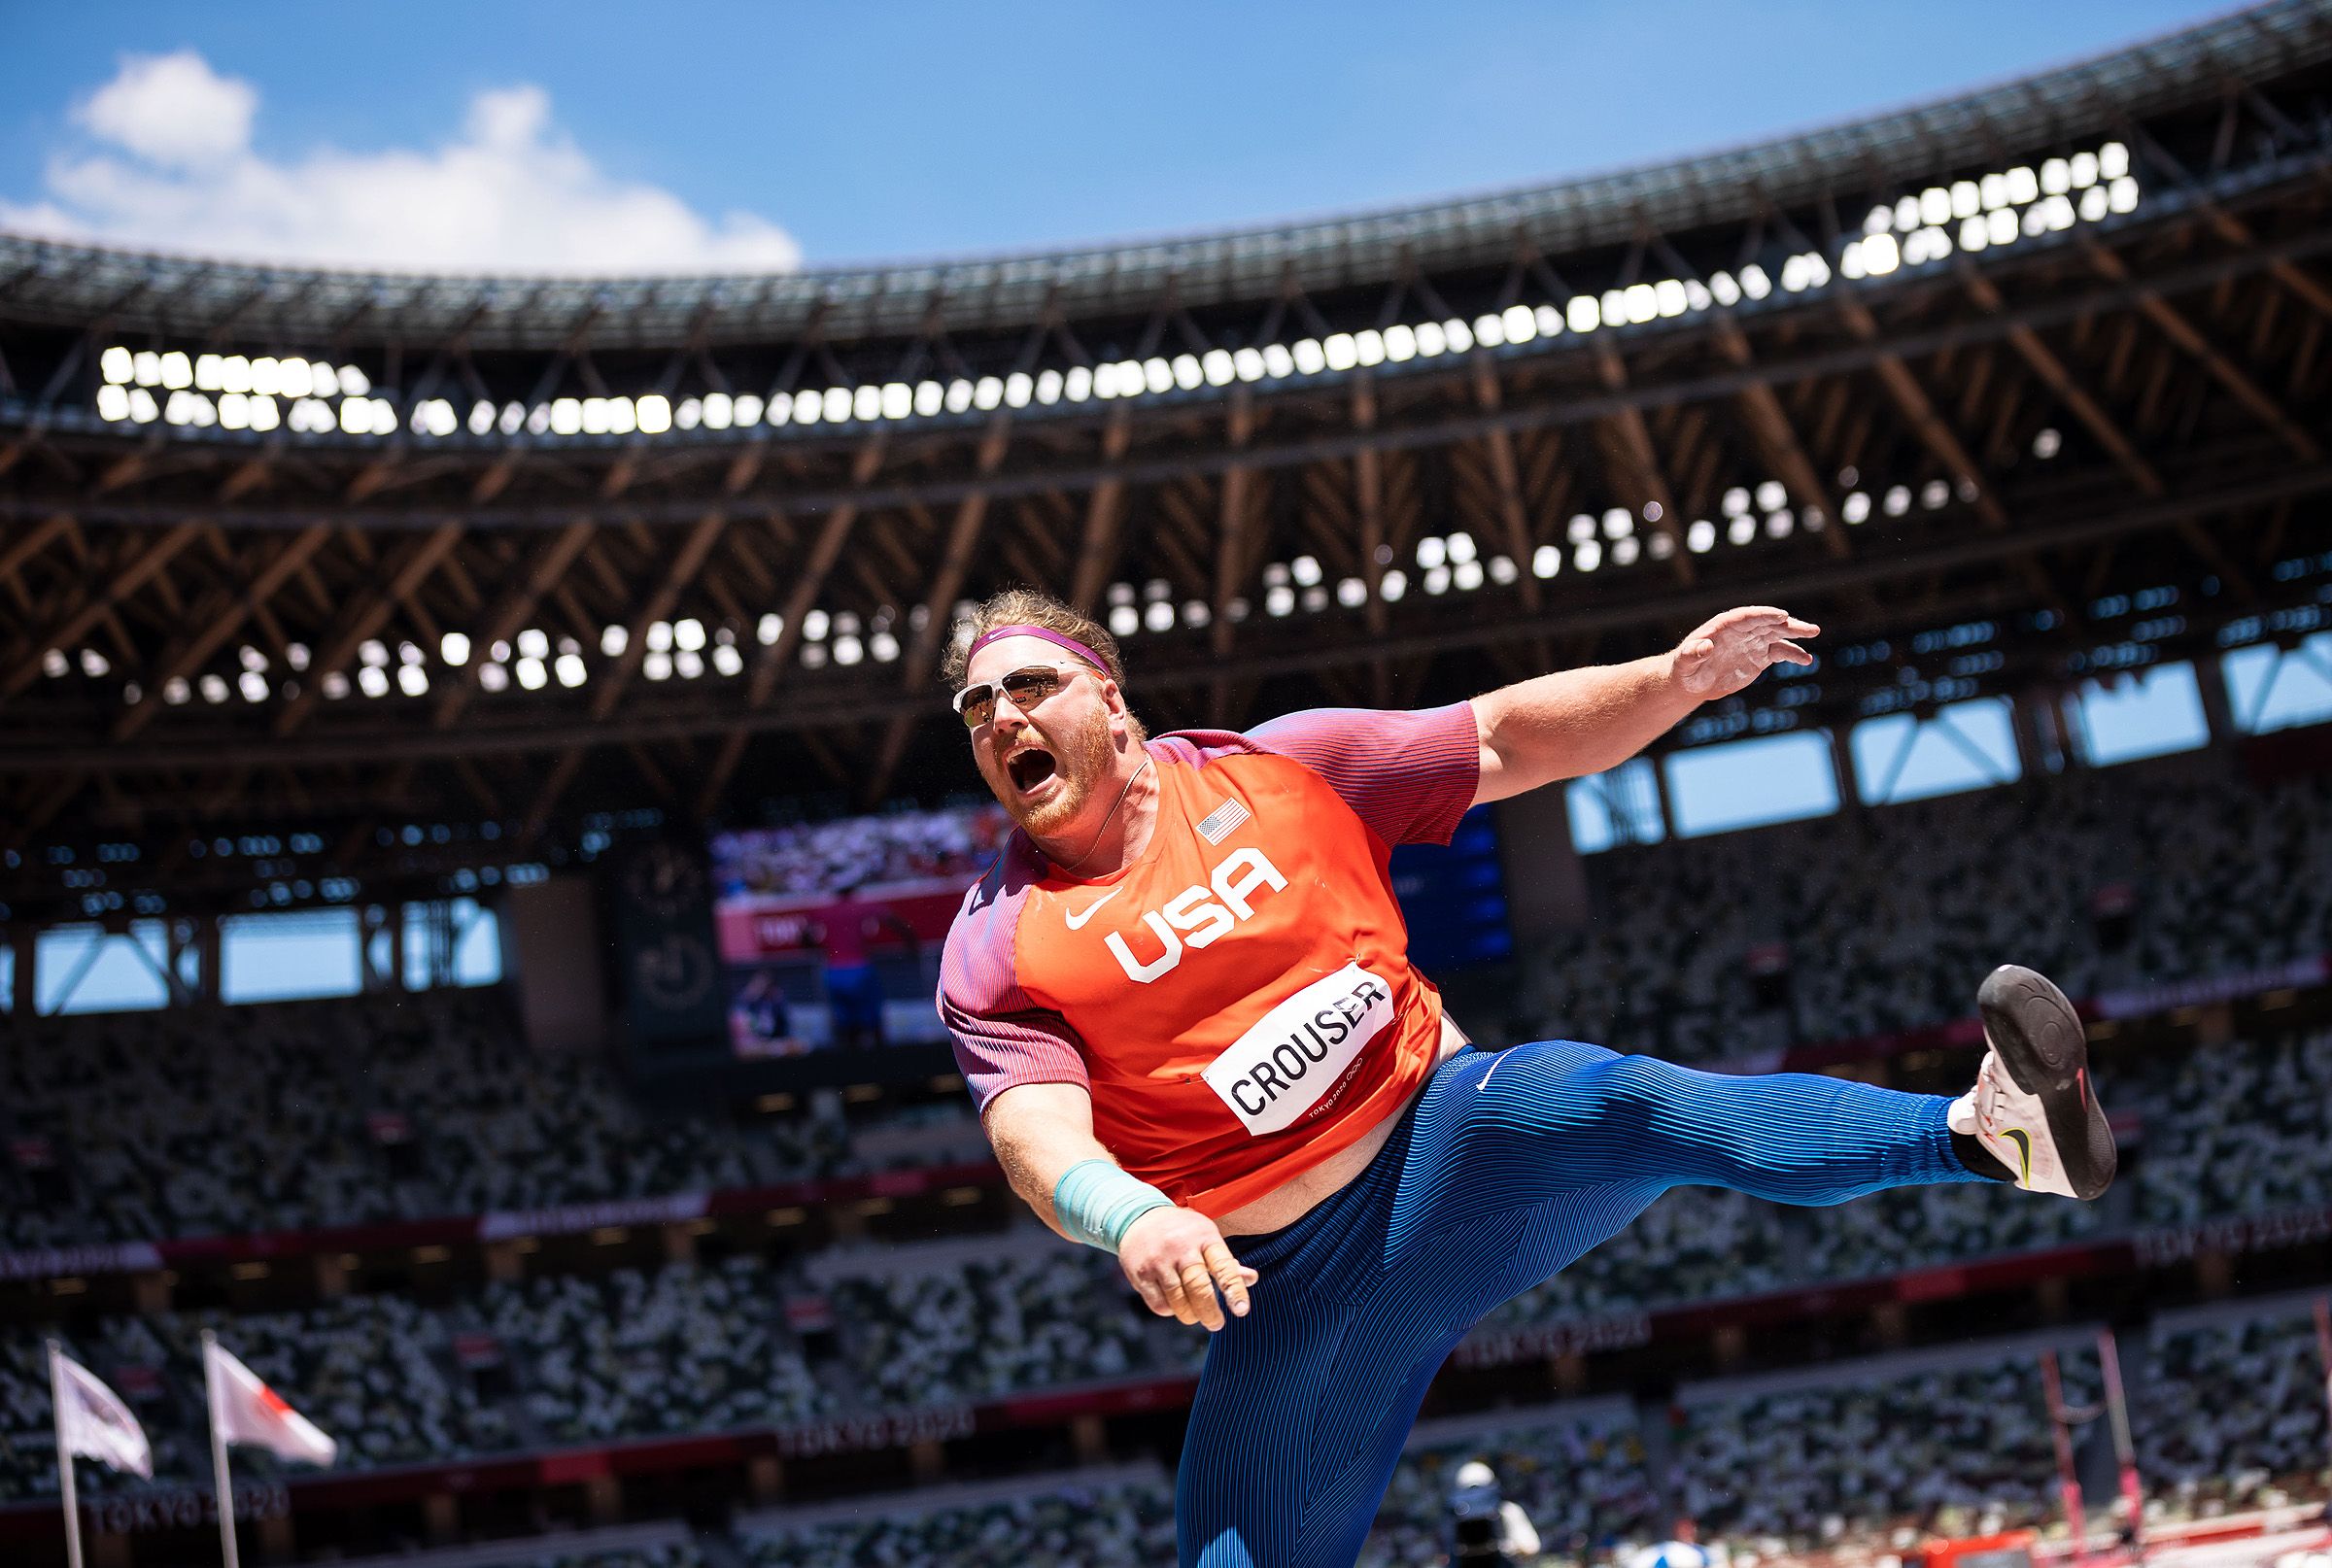 Ryan Crouser in the shot put at the Tokyo Olympics